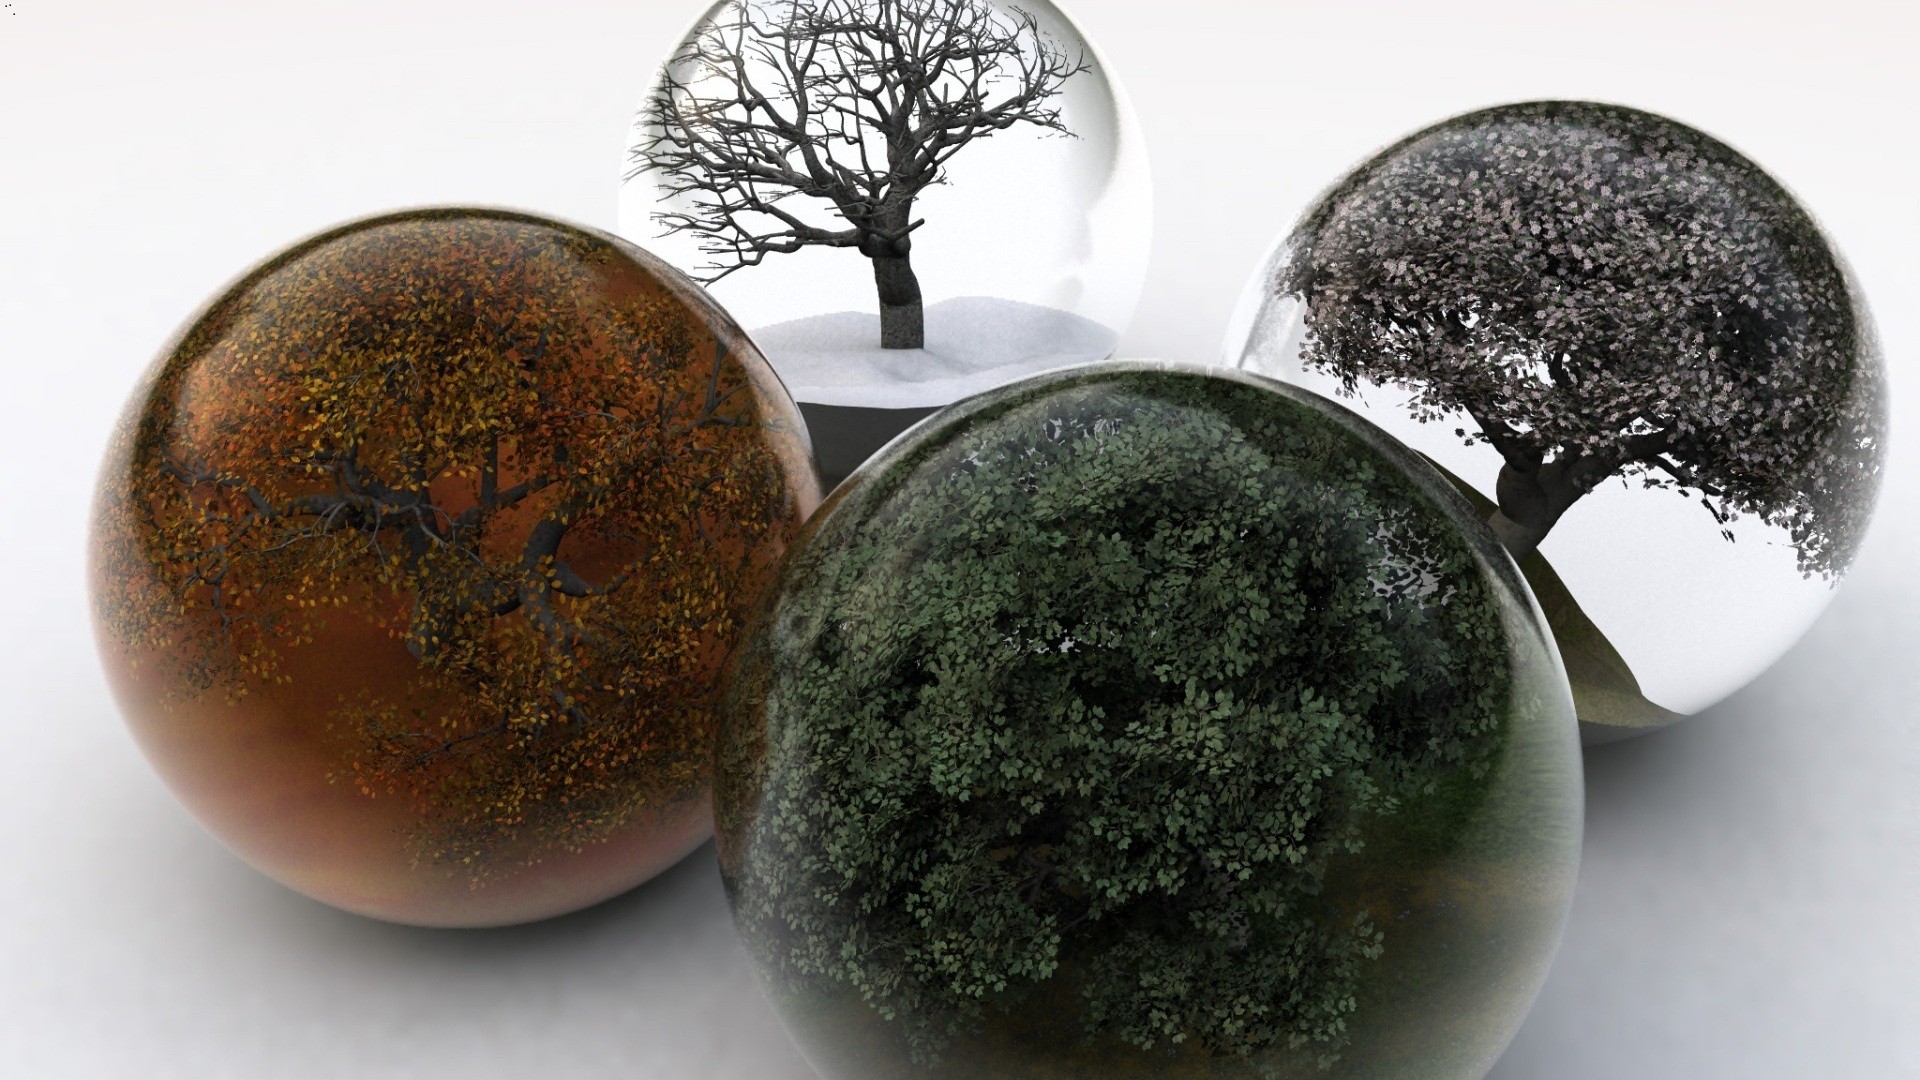 General 1920x1080 digital art sphere nature trees CGI plants simple background white background